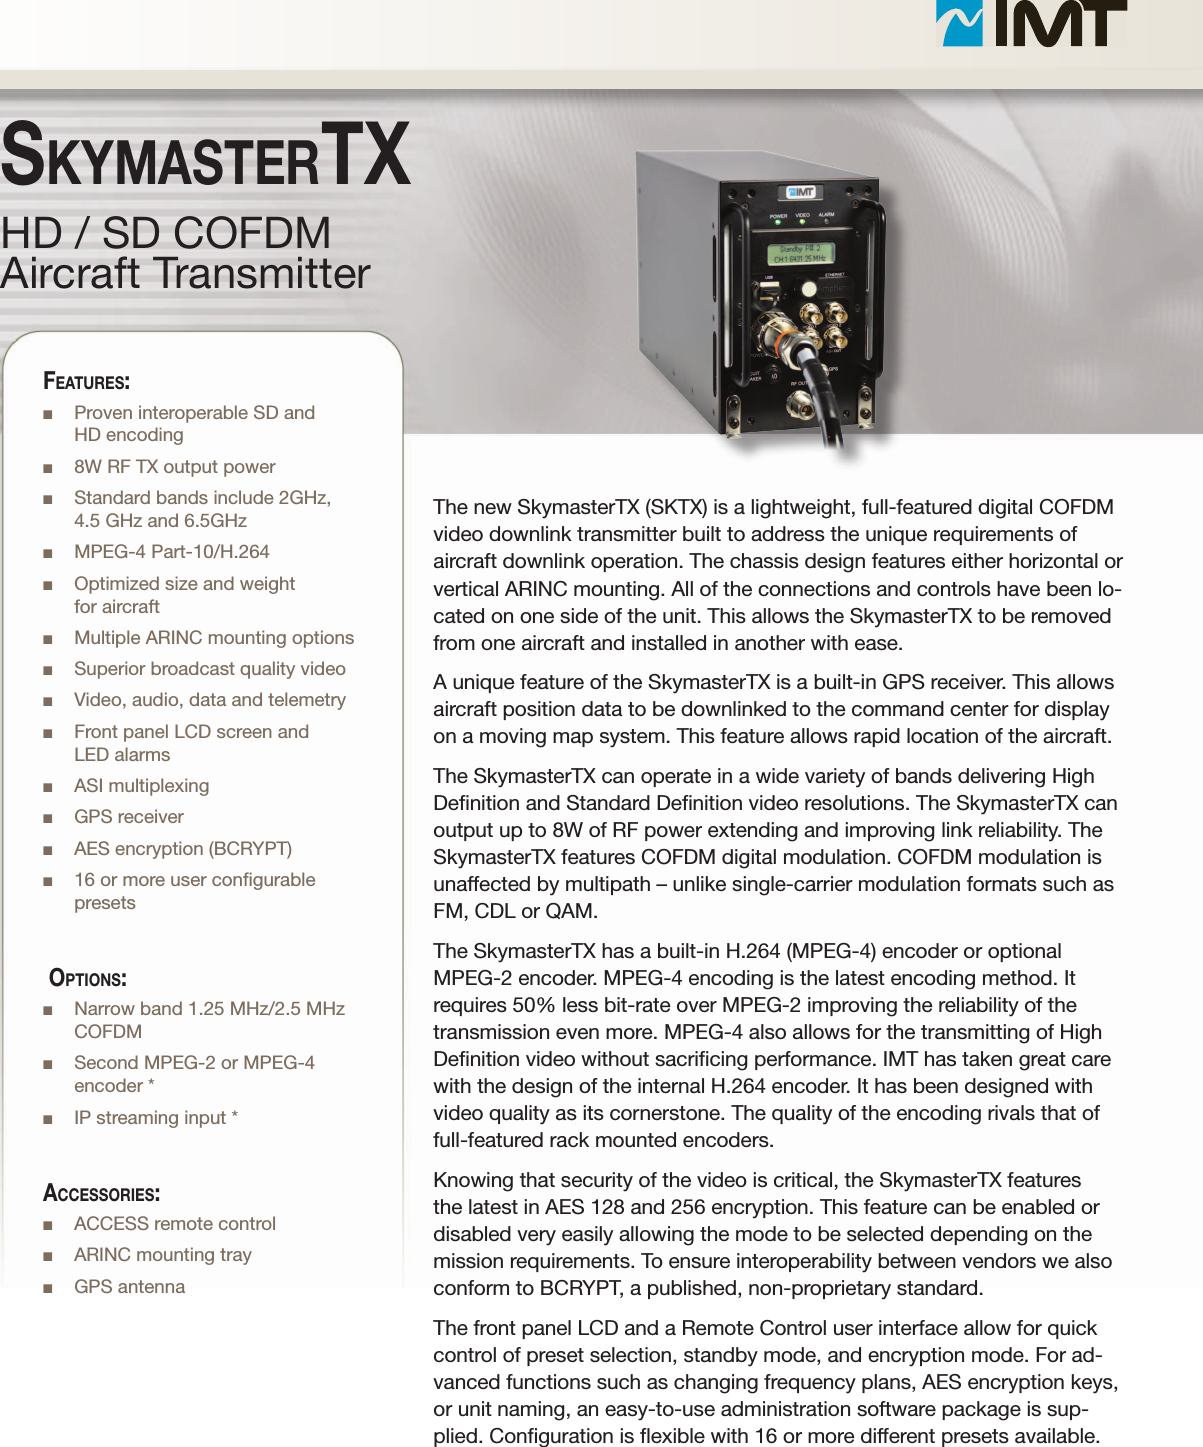 The new SkymasterTX (SKTX) is a lightweight, full-featured digital COFDM video downlink transmitter built to address the unique requirements of aircraft downlink operation. The chassis design features either horizontal or vertical ARINC mounting. All of the connections and controls have been lo-cated on one side of the unit. This allows the SkymasterTX to be removed from one aircraft and installed in another with ease. A unique feature of the SkymasterTX is a built-in GPS receiver. This allows aircraft position data to be downlinked to the command center for display on a moving map system. This feature allows rapid location of the aircraft.The SkymasterTX can operate in a wide variety of bands delivering High Denition and Standard Denition video resolutions. The SkymasterTX can output up to 8W of RF power extending and improving link reliability. The SkymasterTX features COFDM digital modulation. COFDM modulation is unaffected by multipath – unlike single-carrier modulation formats such as FM, CDL or QAM.The SkymasterTX has a built-in H.264 (MPEG-4) encoder or optional MPEG-2 encoder. MPEG-4 encoding is the latest encoding method. It requires 50% less bit-rate over MPEG-2 improving the reliability of the transmission even more. MPEG-4 also allows for the transmitting of High Denition video without sacricing performance. IMT has taken great care with the design of the internal H.264 encoder. It has been designed with video quality as its cornerstone. The quality of the encoding rivals that of full-featured rack mounted encoders. Knowing that security of the video is critical, the SkymasterTX features the latest in AES 128 and 256 encryption. This feature can be enabled or disabled very easily allowing the mode to be selected depending on the mission requirements. To ensure interoperability between vendors we also conform to BCRYPT, a published, non-proprietary standard.The front panel LCD and a Remote Control user interface allow for quick control of preset selection, standby mode, and encryption mode. For ad-vanced functions such as changing frequency plans, AES encryption keys, or unit naming, an easy-to-use administration software package is sup-plied. Conguration is exible with 16 or more different presets available.HD / SD COFDMAircraft TransmitterSkymaStertXFeatureS:n Proven interoperable SD and  HD encodingn 8W RF TX output powern Standard bands include 2GHz,  4.5 GHz and 6.5GHzn MPEG-4 Part-10/H.264n Optimized size and weight  for aircraftn Multiple ARINC mounting optionsn Superior broadcast quality videon Video, audio, data and telemetryn Front panel LCD screen and  LED alarmsn ASI multiplexingn GPS receivern AES encryption (BCRYPT)n 16 or more user congurable presets OptiOnS:n Narrow band 1.25 MHz/2.5 MHz COFDMn Second MPEG-2 or MPEG-4 encoder *n IP streaming input *acceSSOrieS:n ACCESS remote controln ARINC mounting trayn GPS antenna